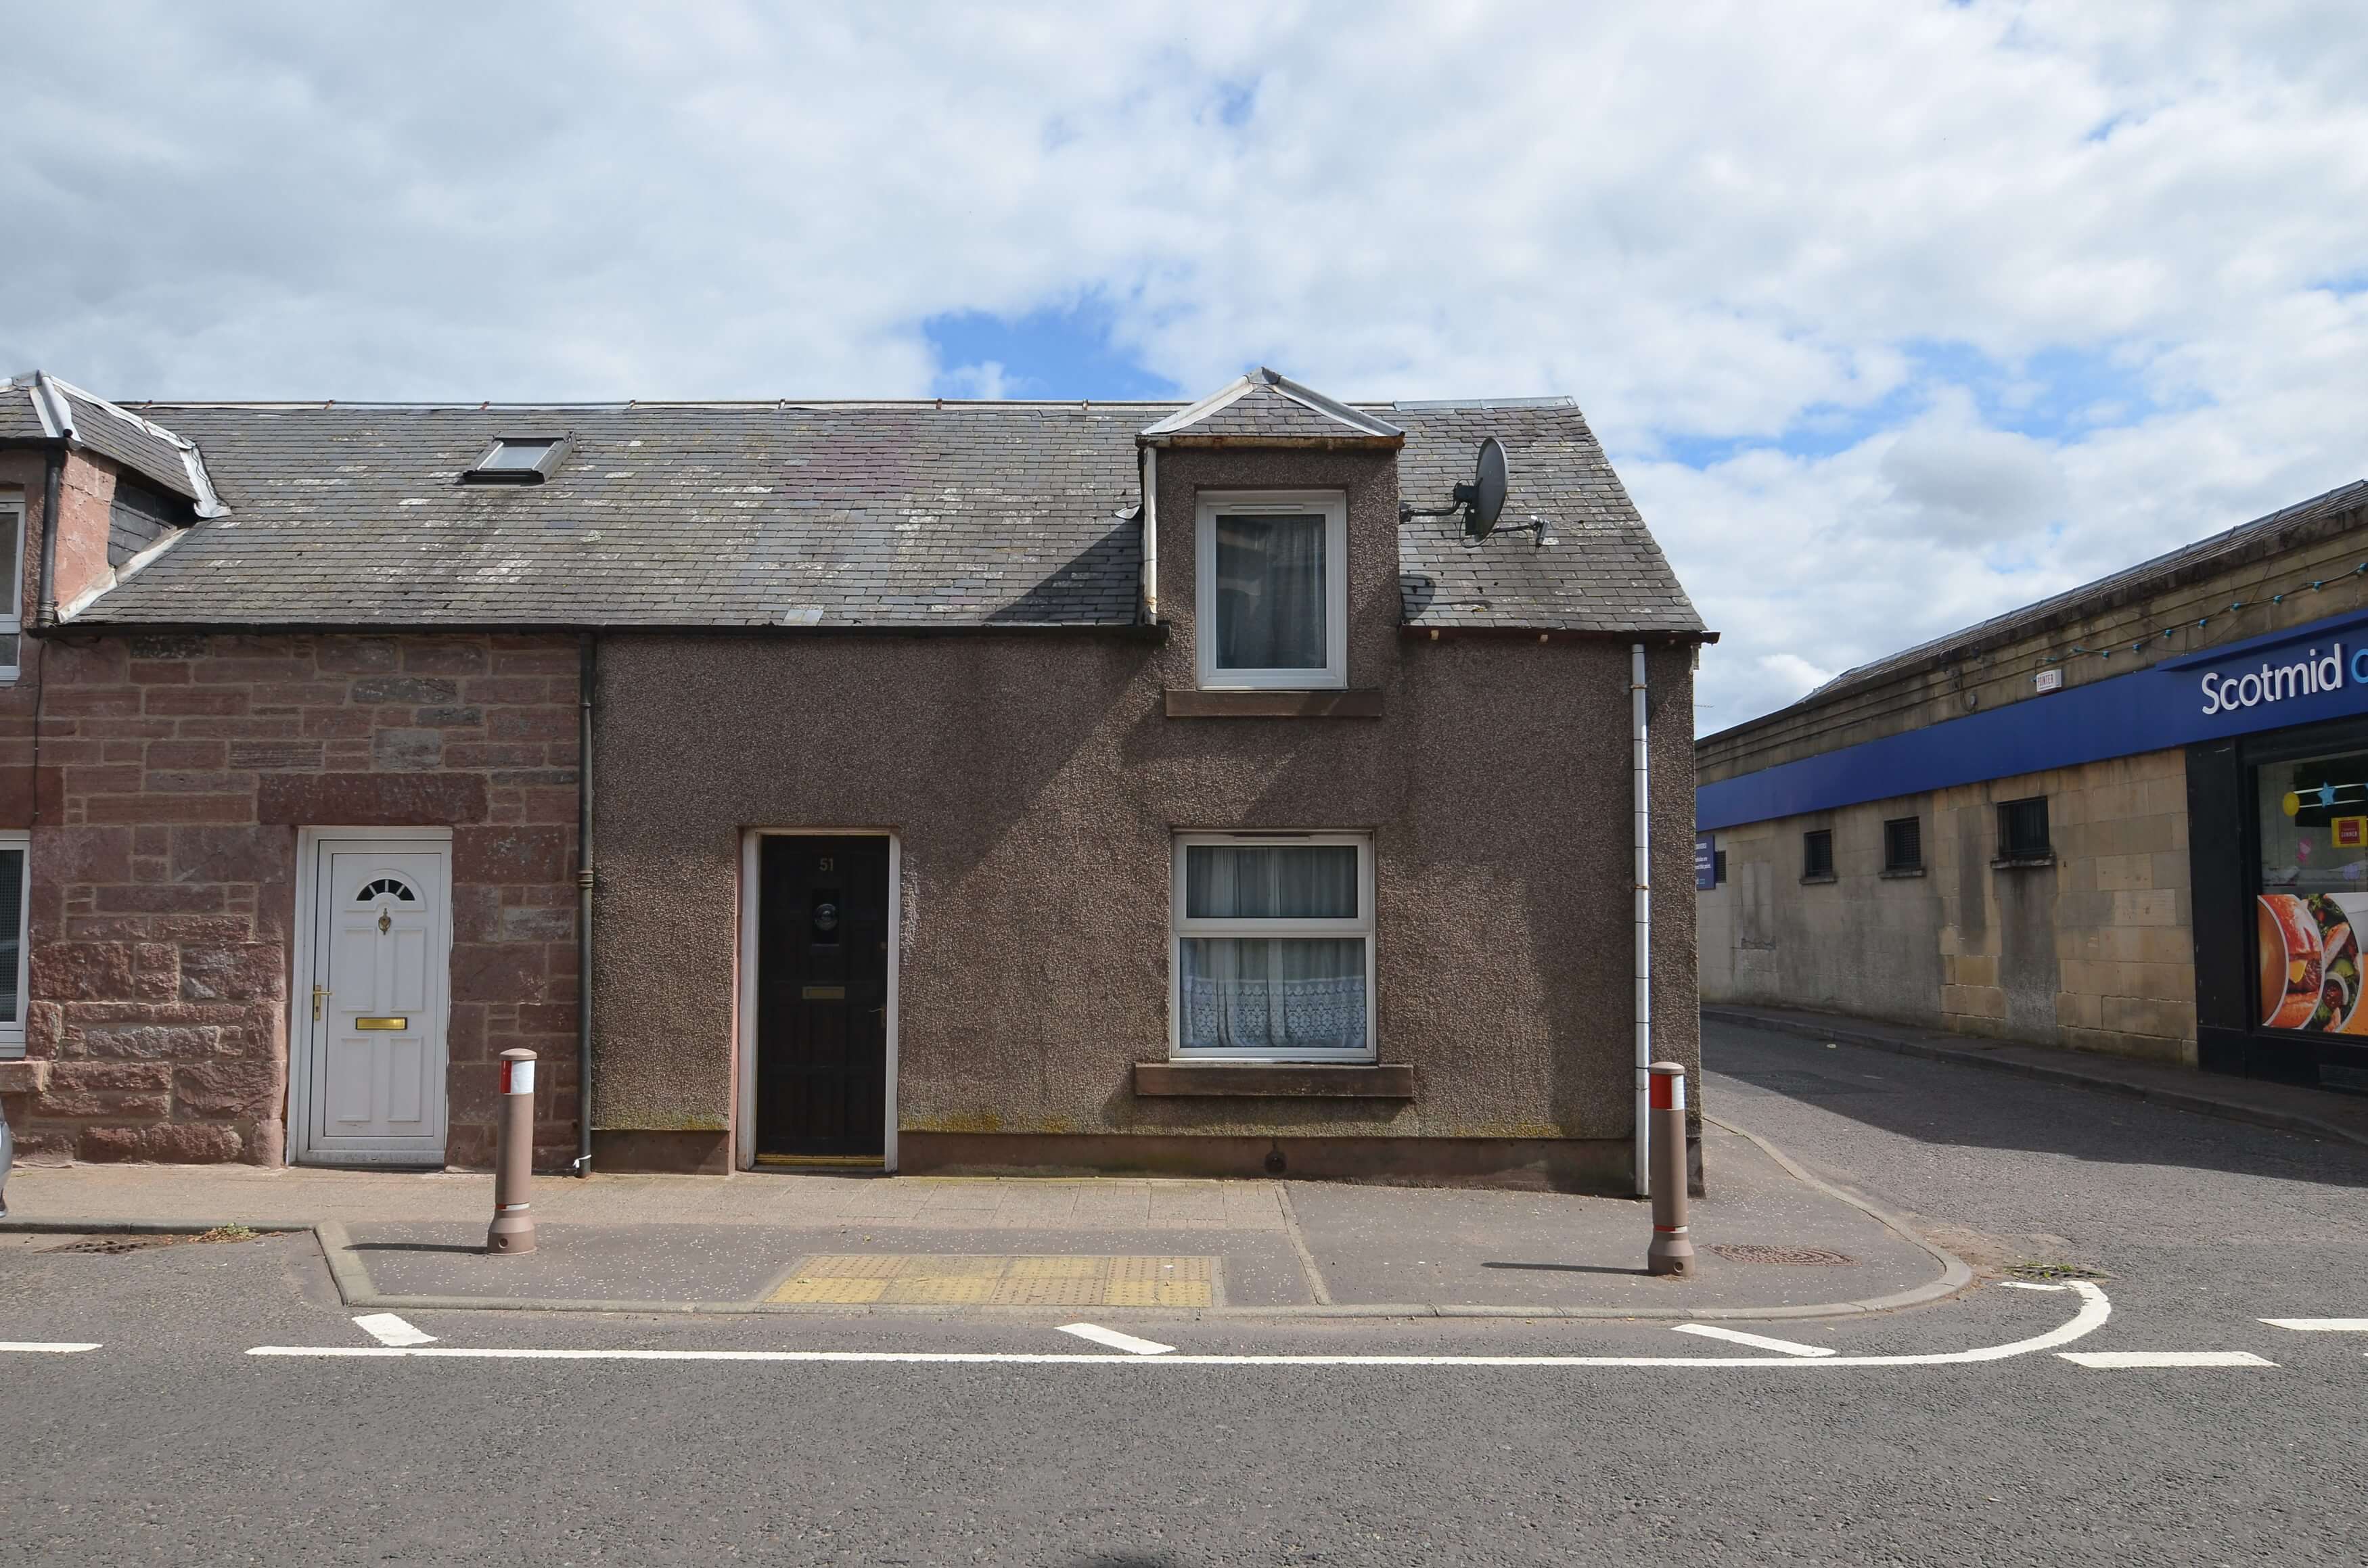 2 Bedroom House for Sale in Alyth, Blairgrowrie, Perthshire